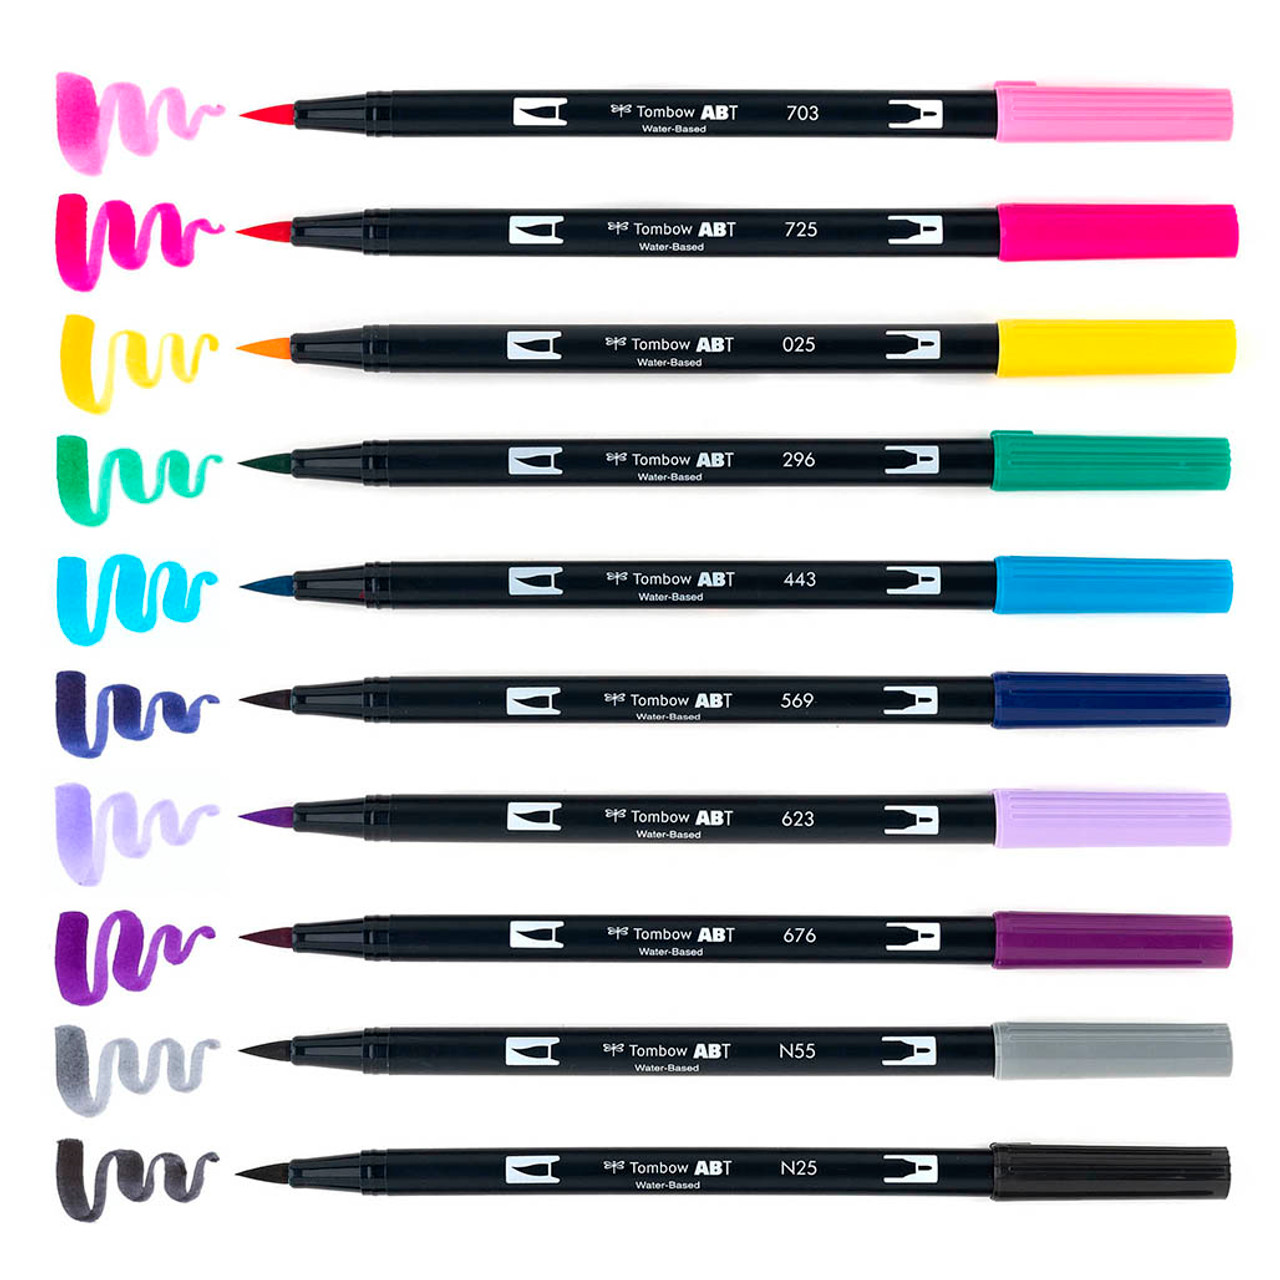 6ct Dual Brush Pen Art Markers Galaxy Palette - Tombow : Target